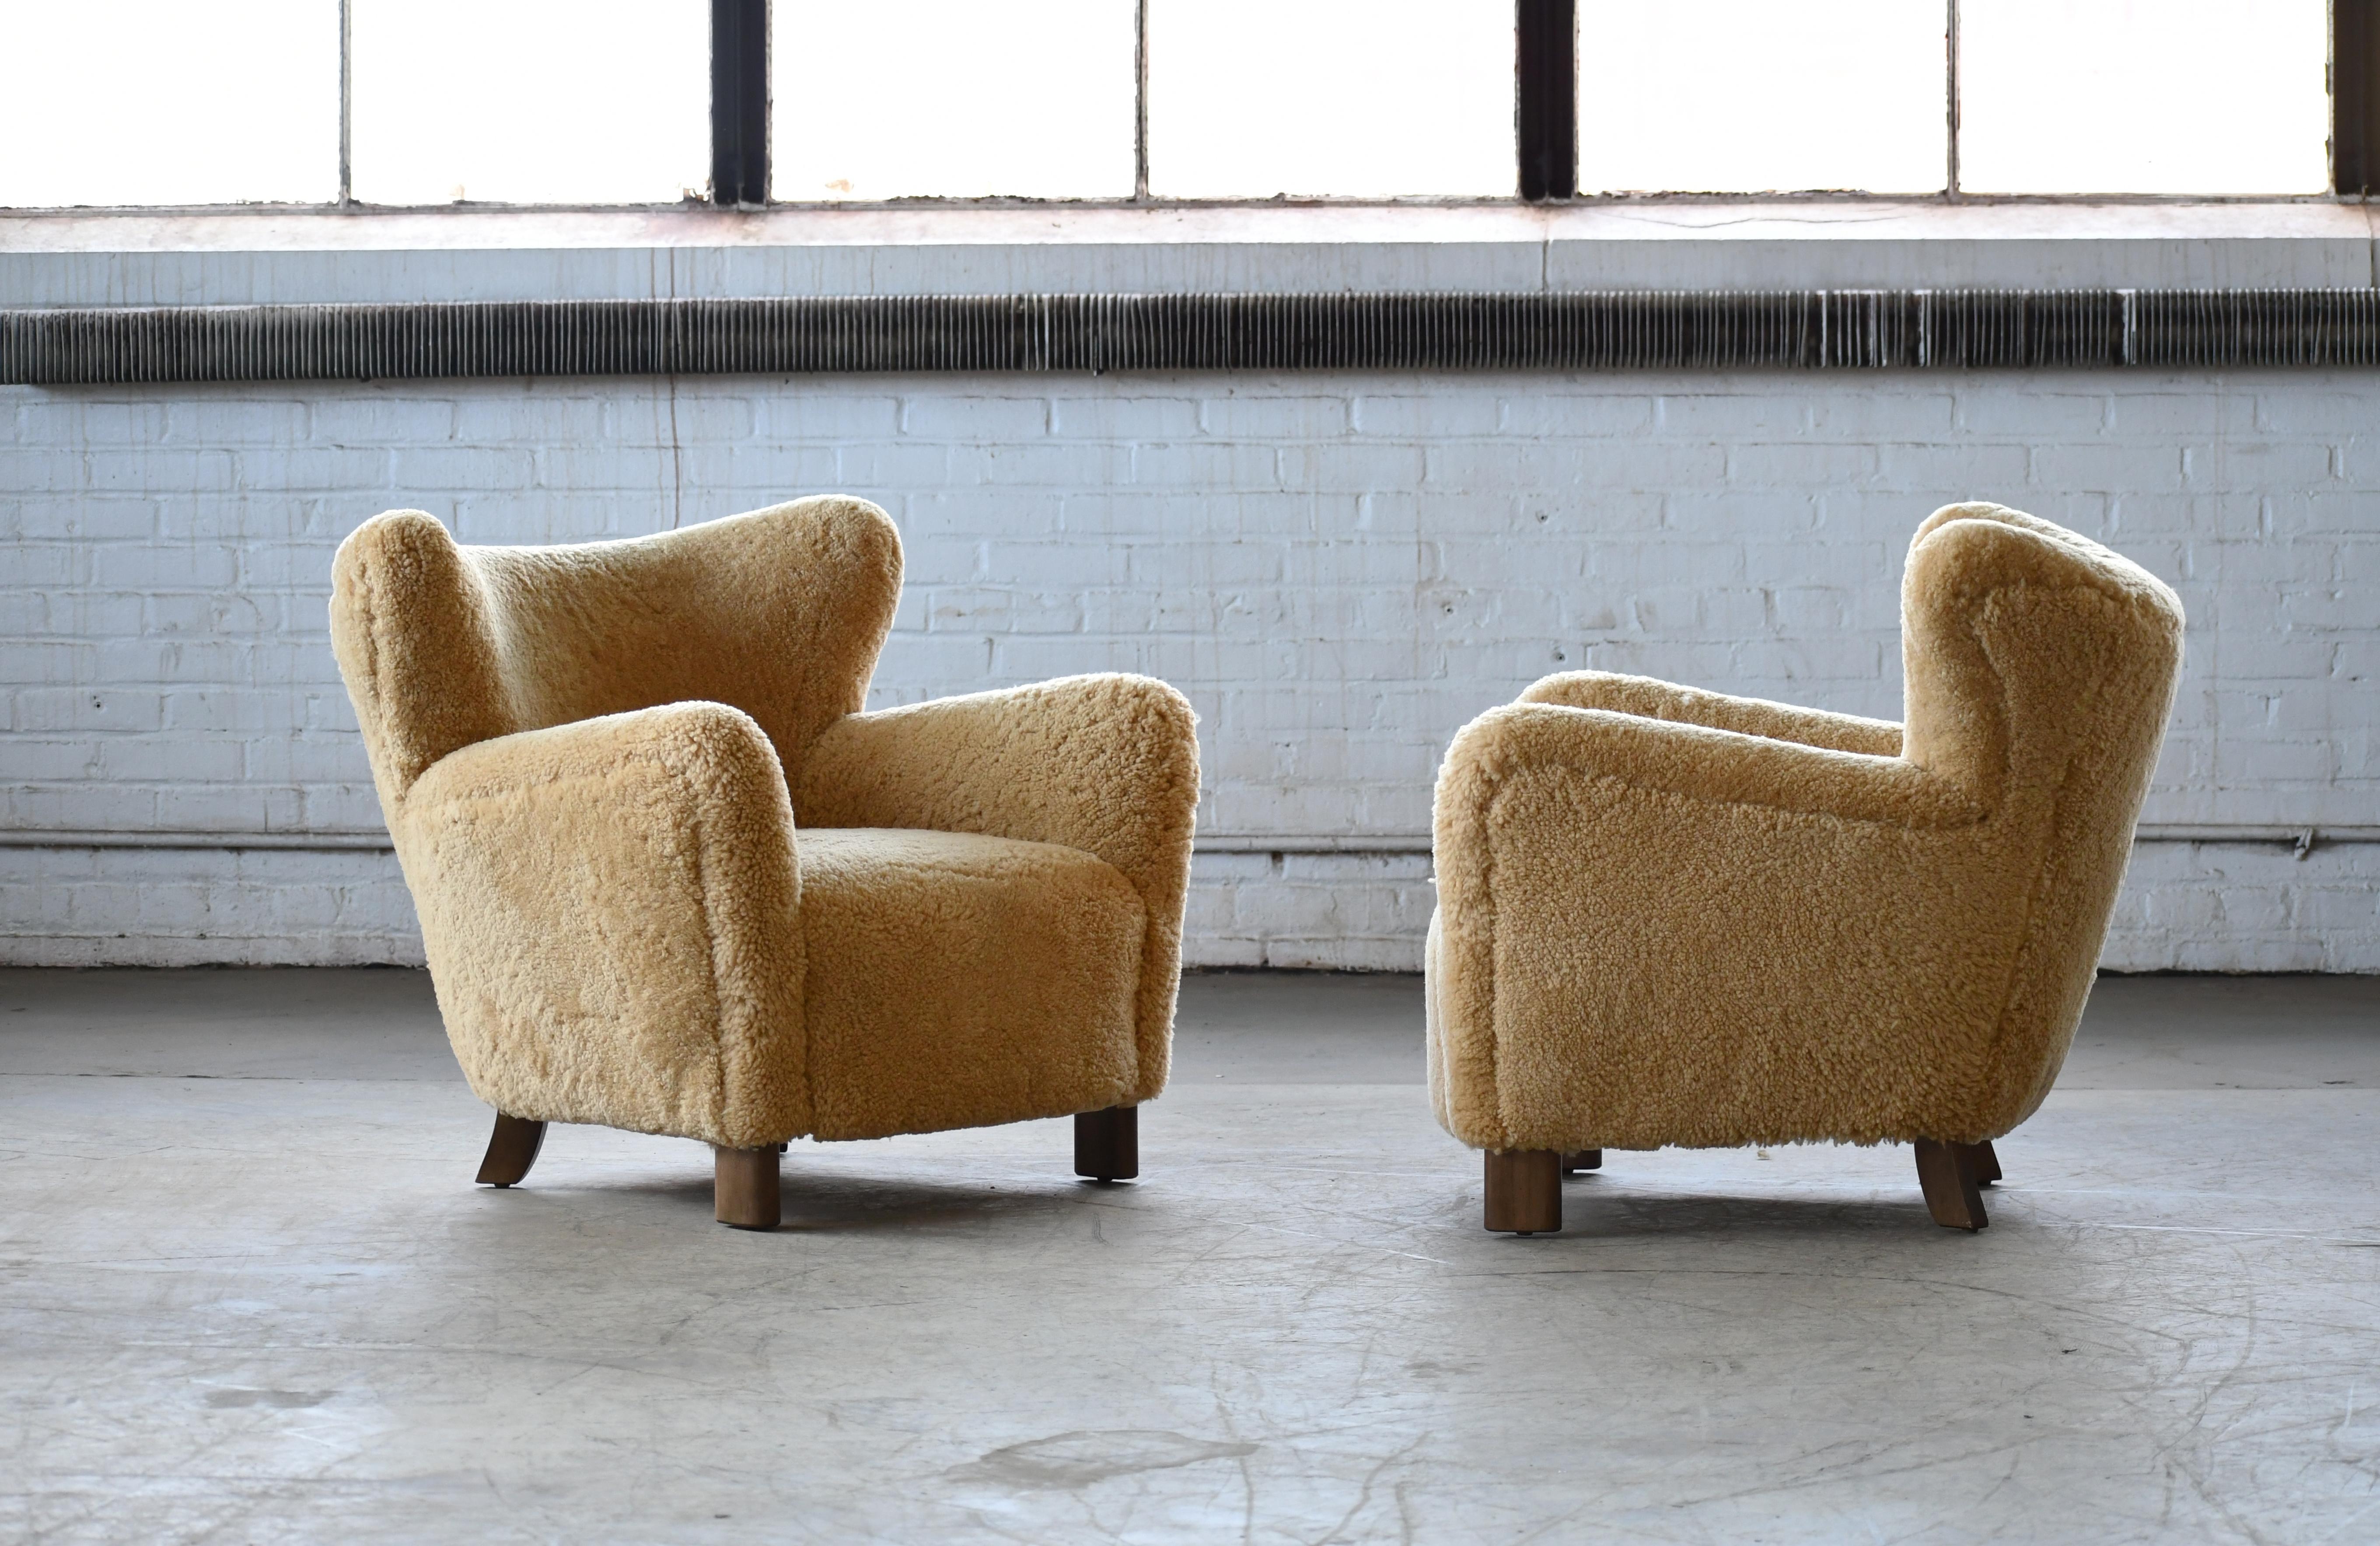 Pair of 1940's Style Classic Club or Lounge Chairs in Amber Color Shearling For Sale 6